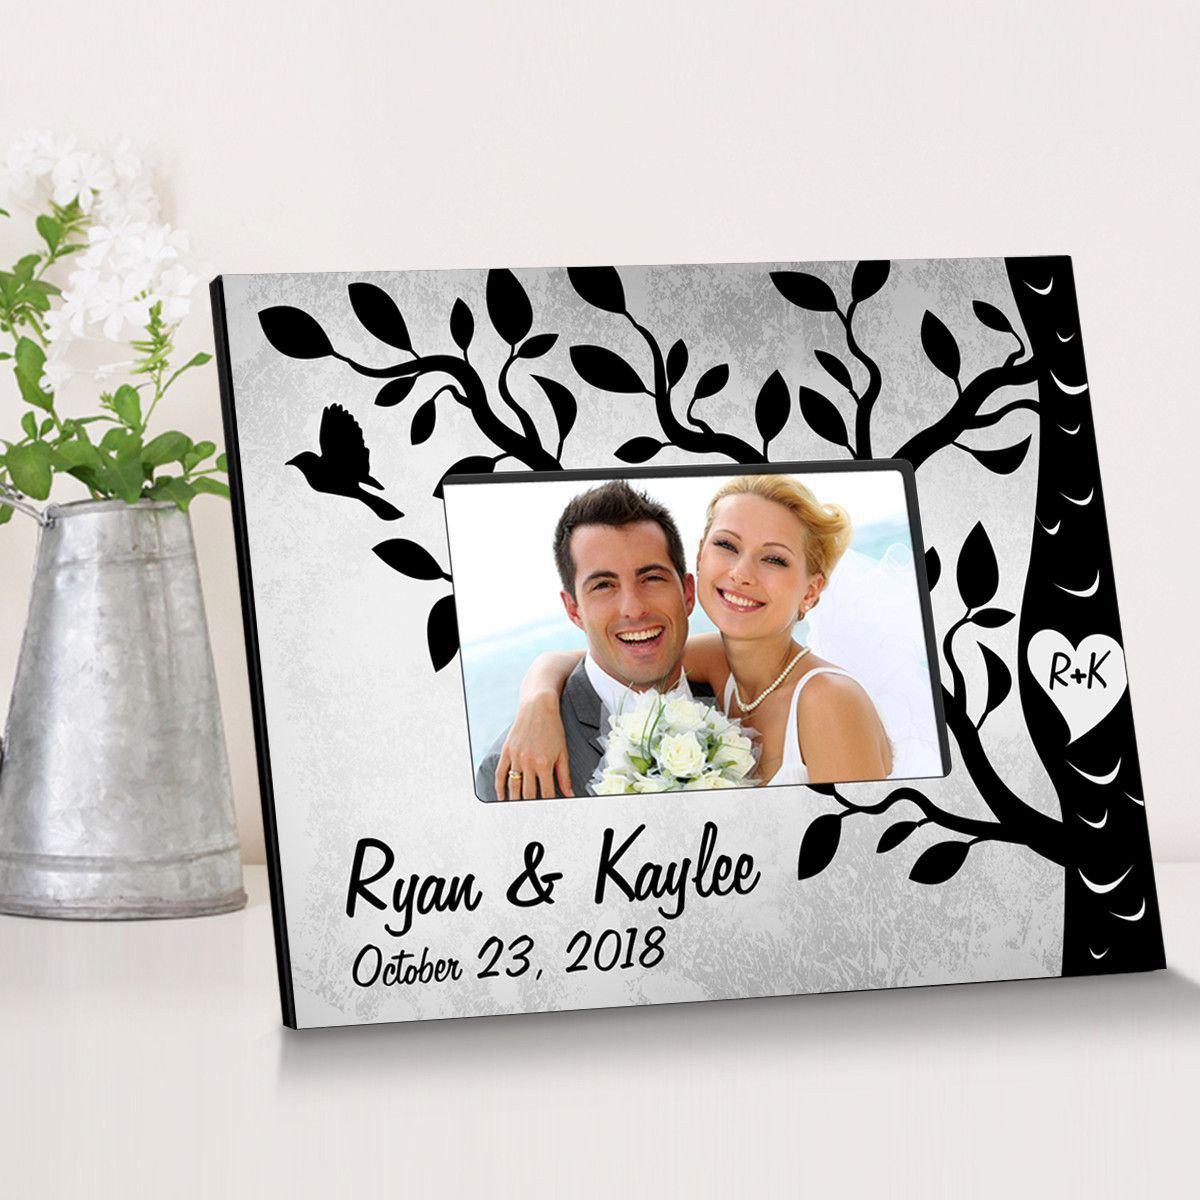 Personalized Etchings On The Tree Wooden Picture Frame